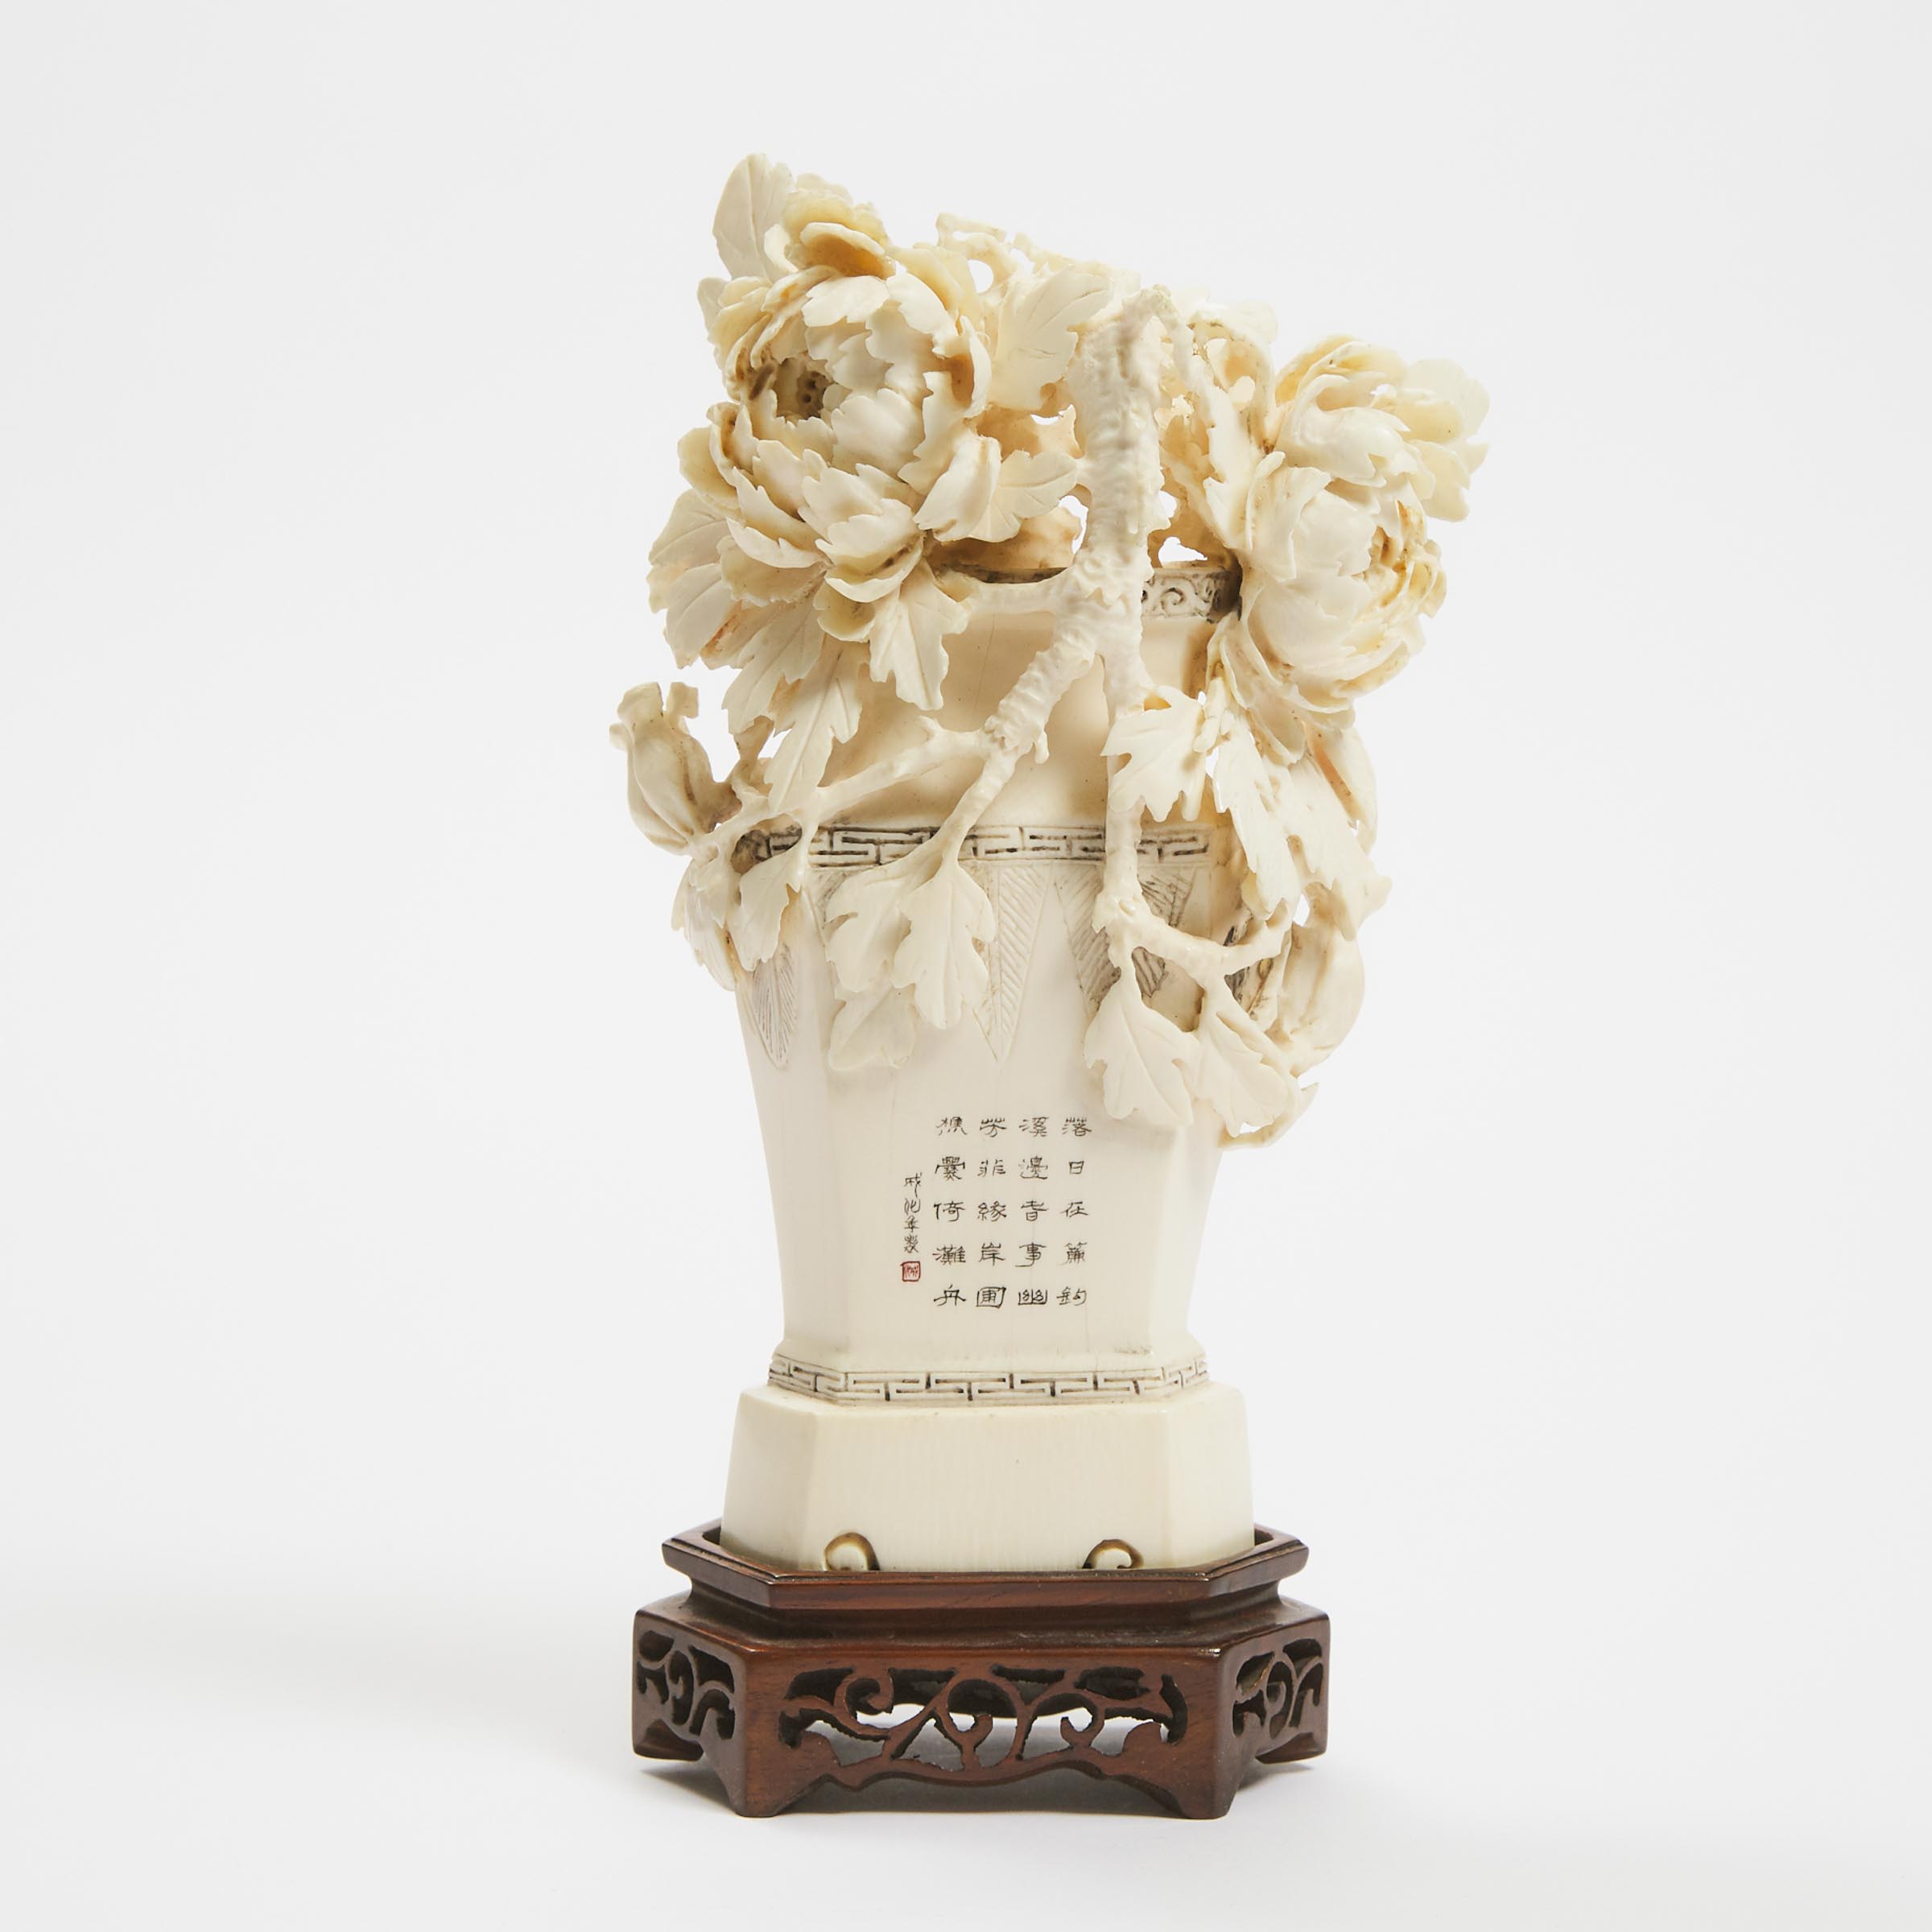 A Carved Ivory Peony Vase, Early to Mid 20th Century